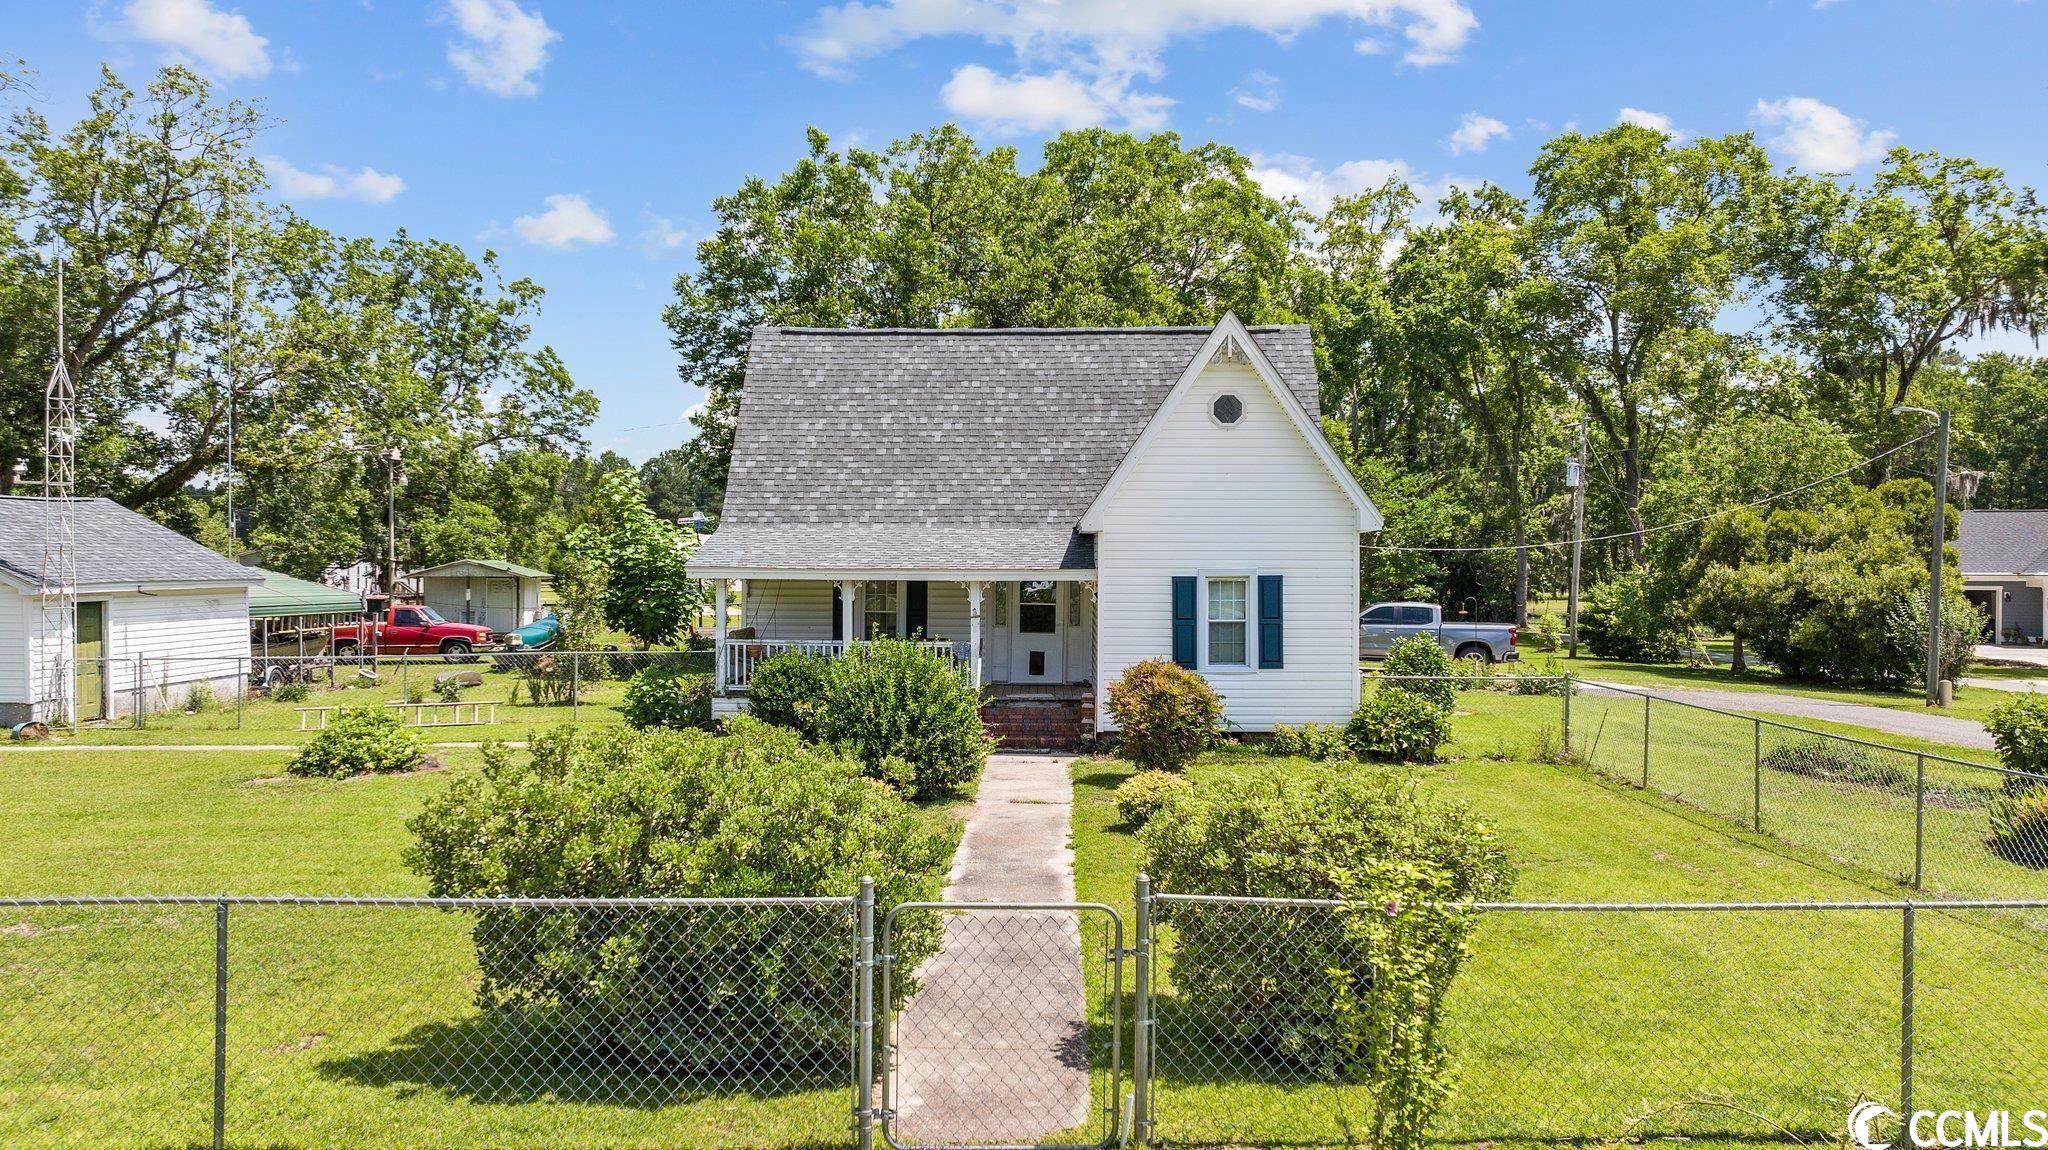 this 3bd 1ba located on old reaves ferry rd is a quaint 1913 single family home is in very good condition with a new roof replaced in 2022 and new hvac replaced in 2022 as well.  updated kitchen as well as plenty of yard and storage space on the property.  acreage is currently tbd, it's contingent on a subdivision from the manufactured property as well on the land.  book your showing today!